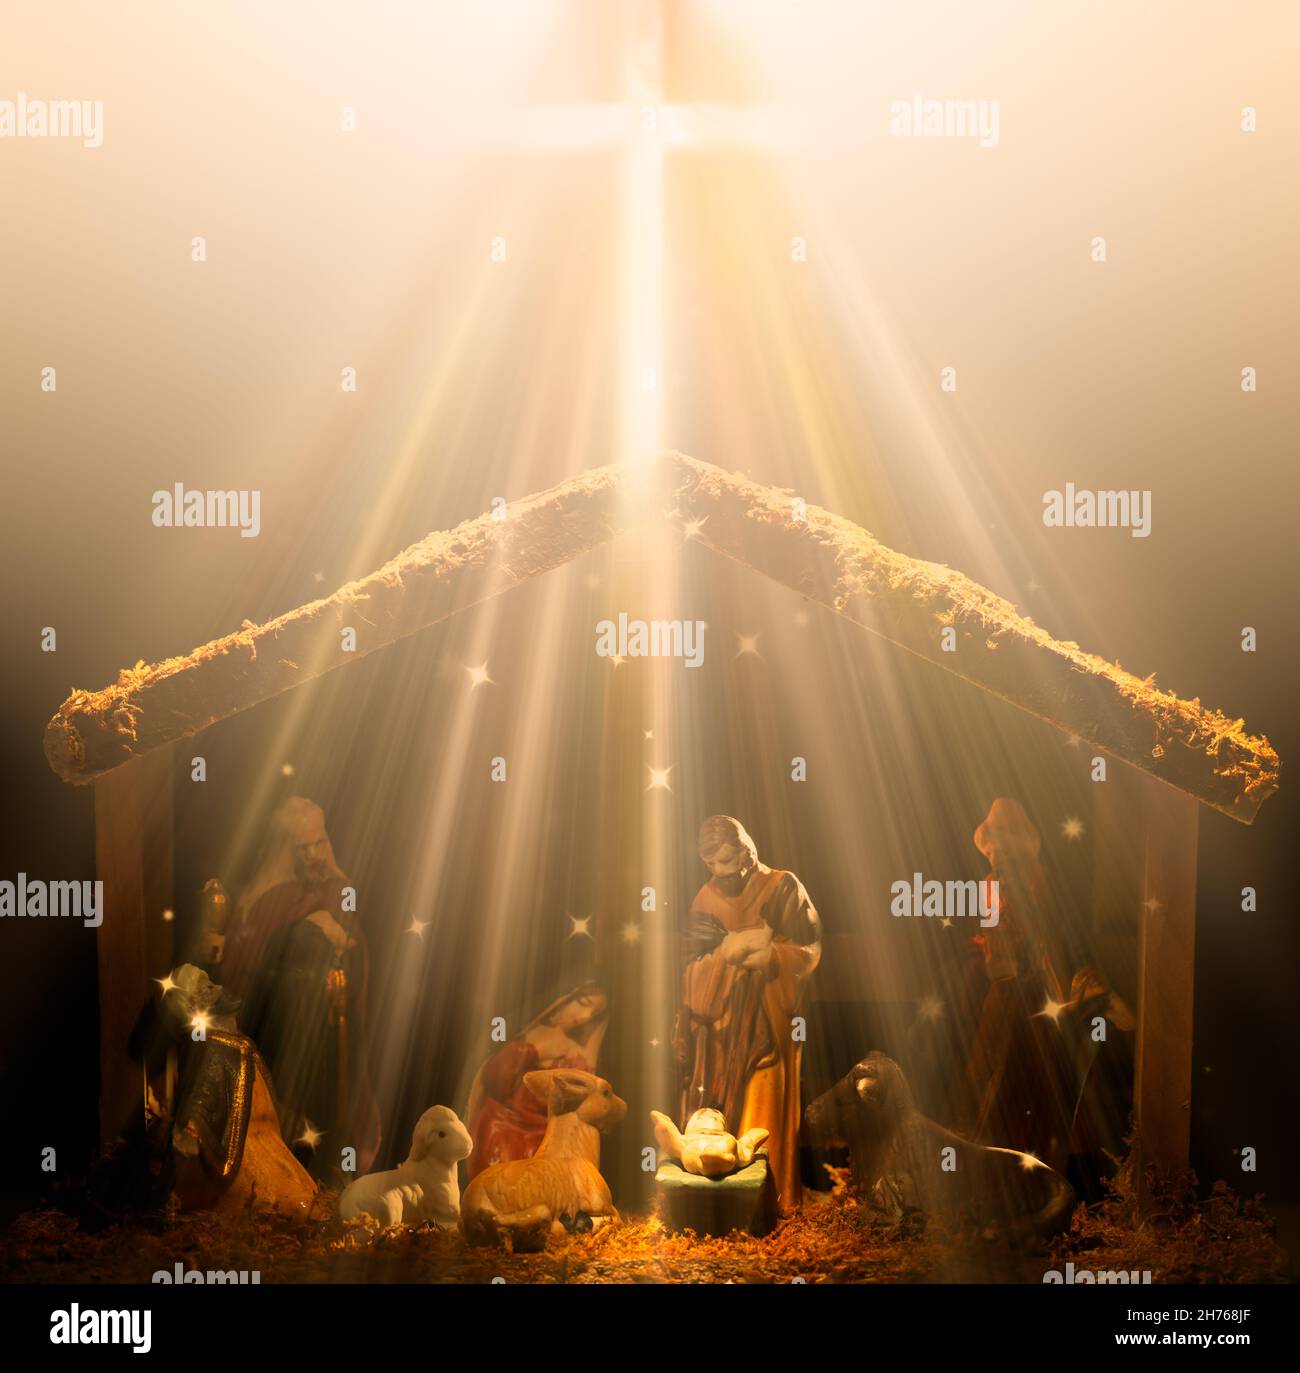 Christian nativity scene glowing in heavenly rays of light with the baby Jesus glowing in the center. Stock Photo